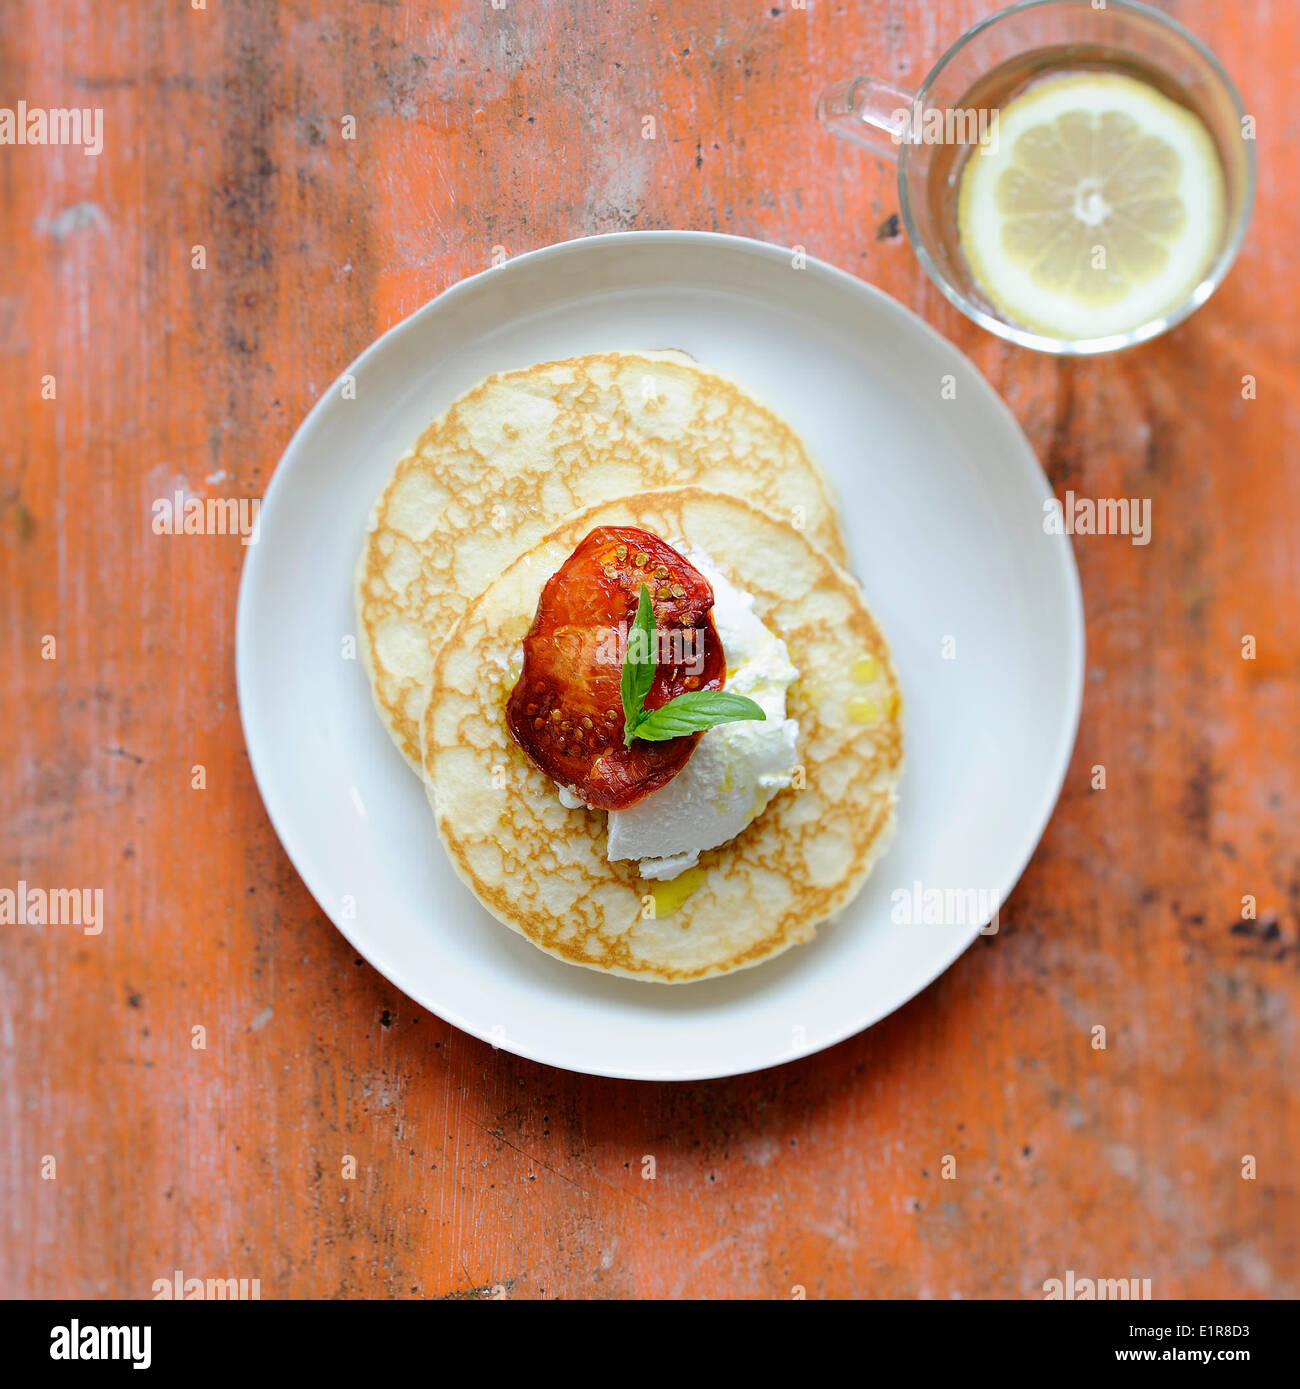 Blinis with ricotta and sun-dried tomatoes Stock Photo